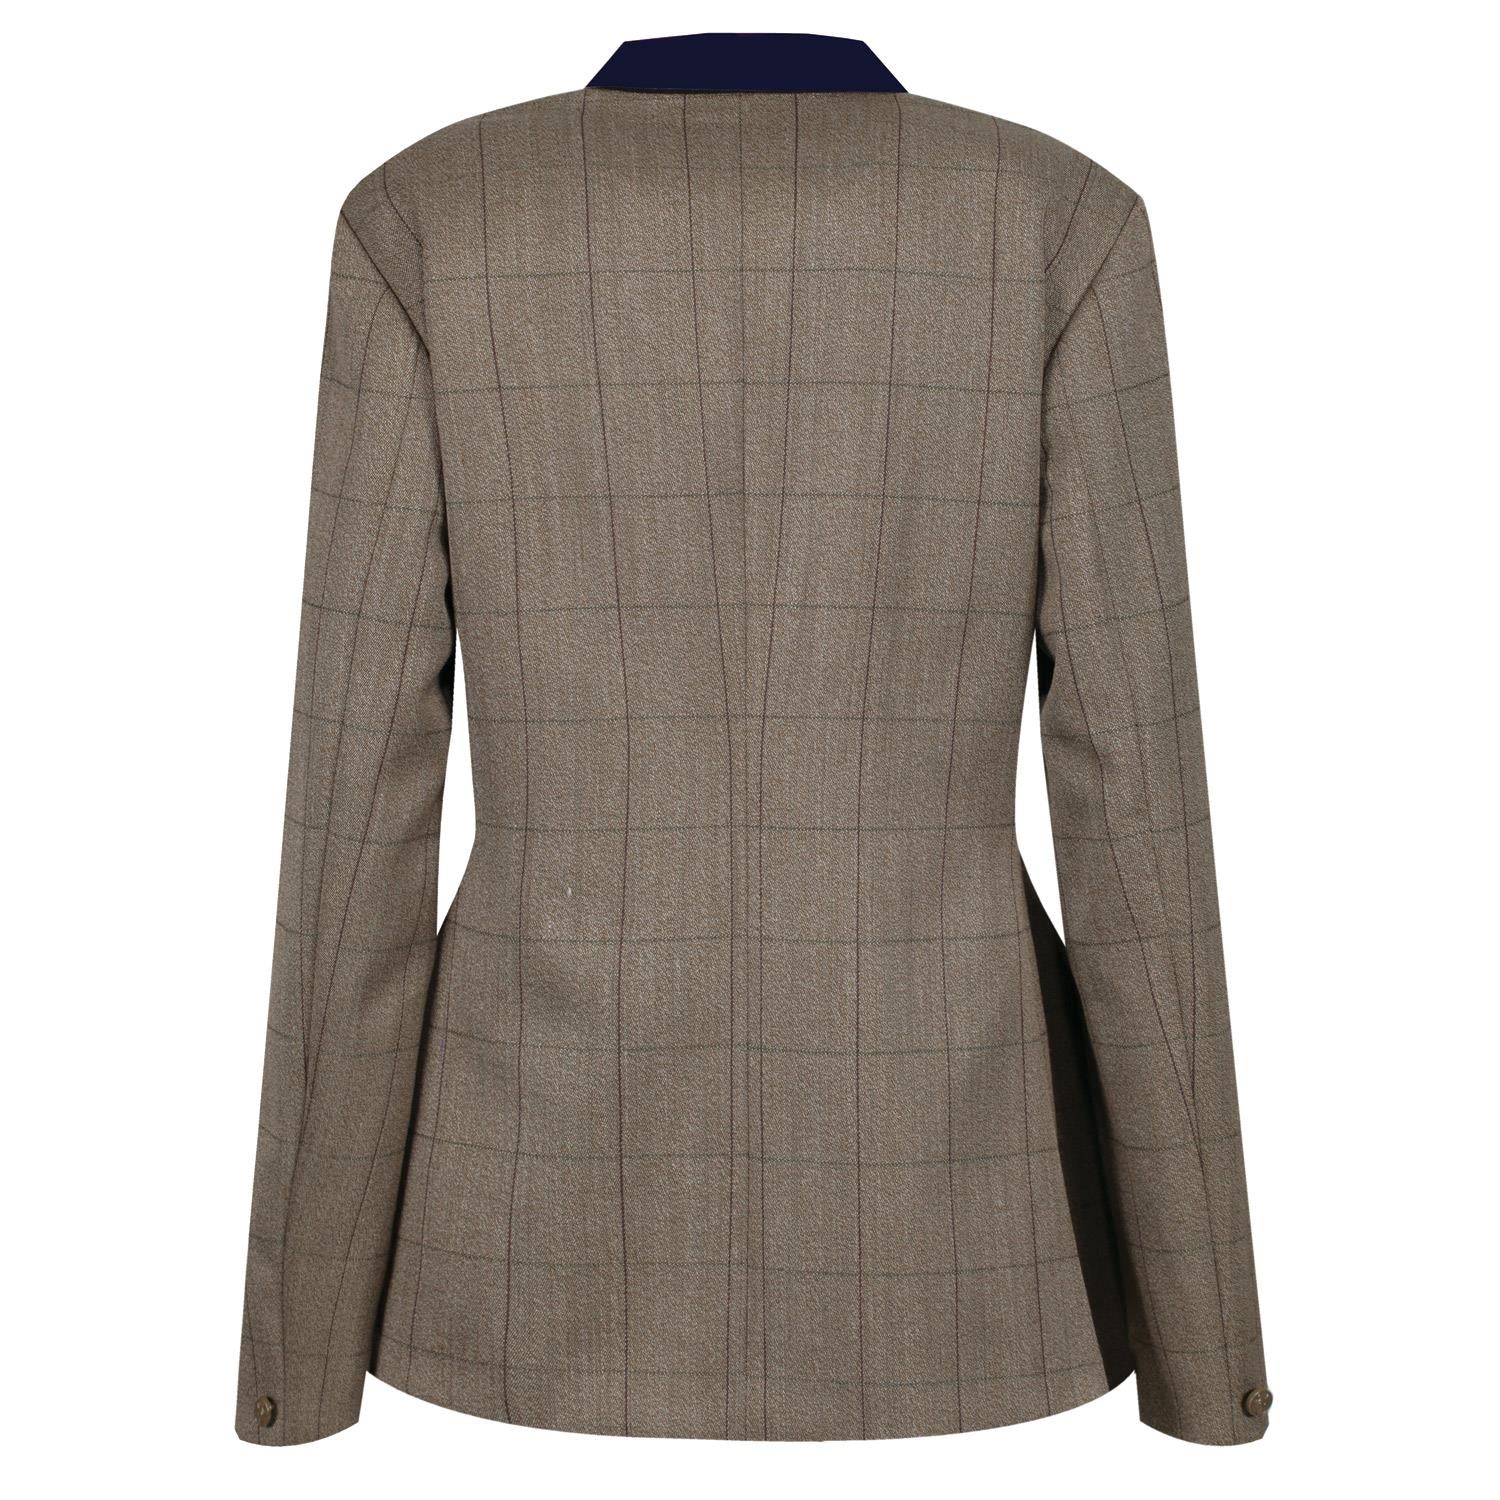 Equetech Foxbury Deluxe Tweed Riding Jacket - Just Horse Riders